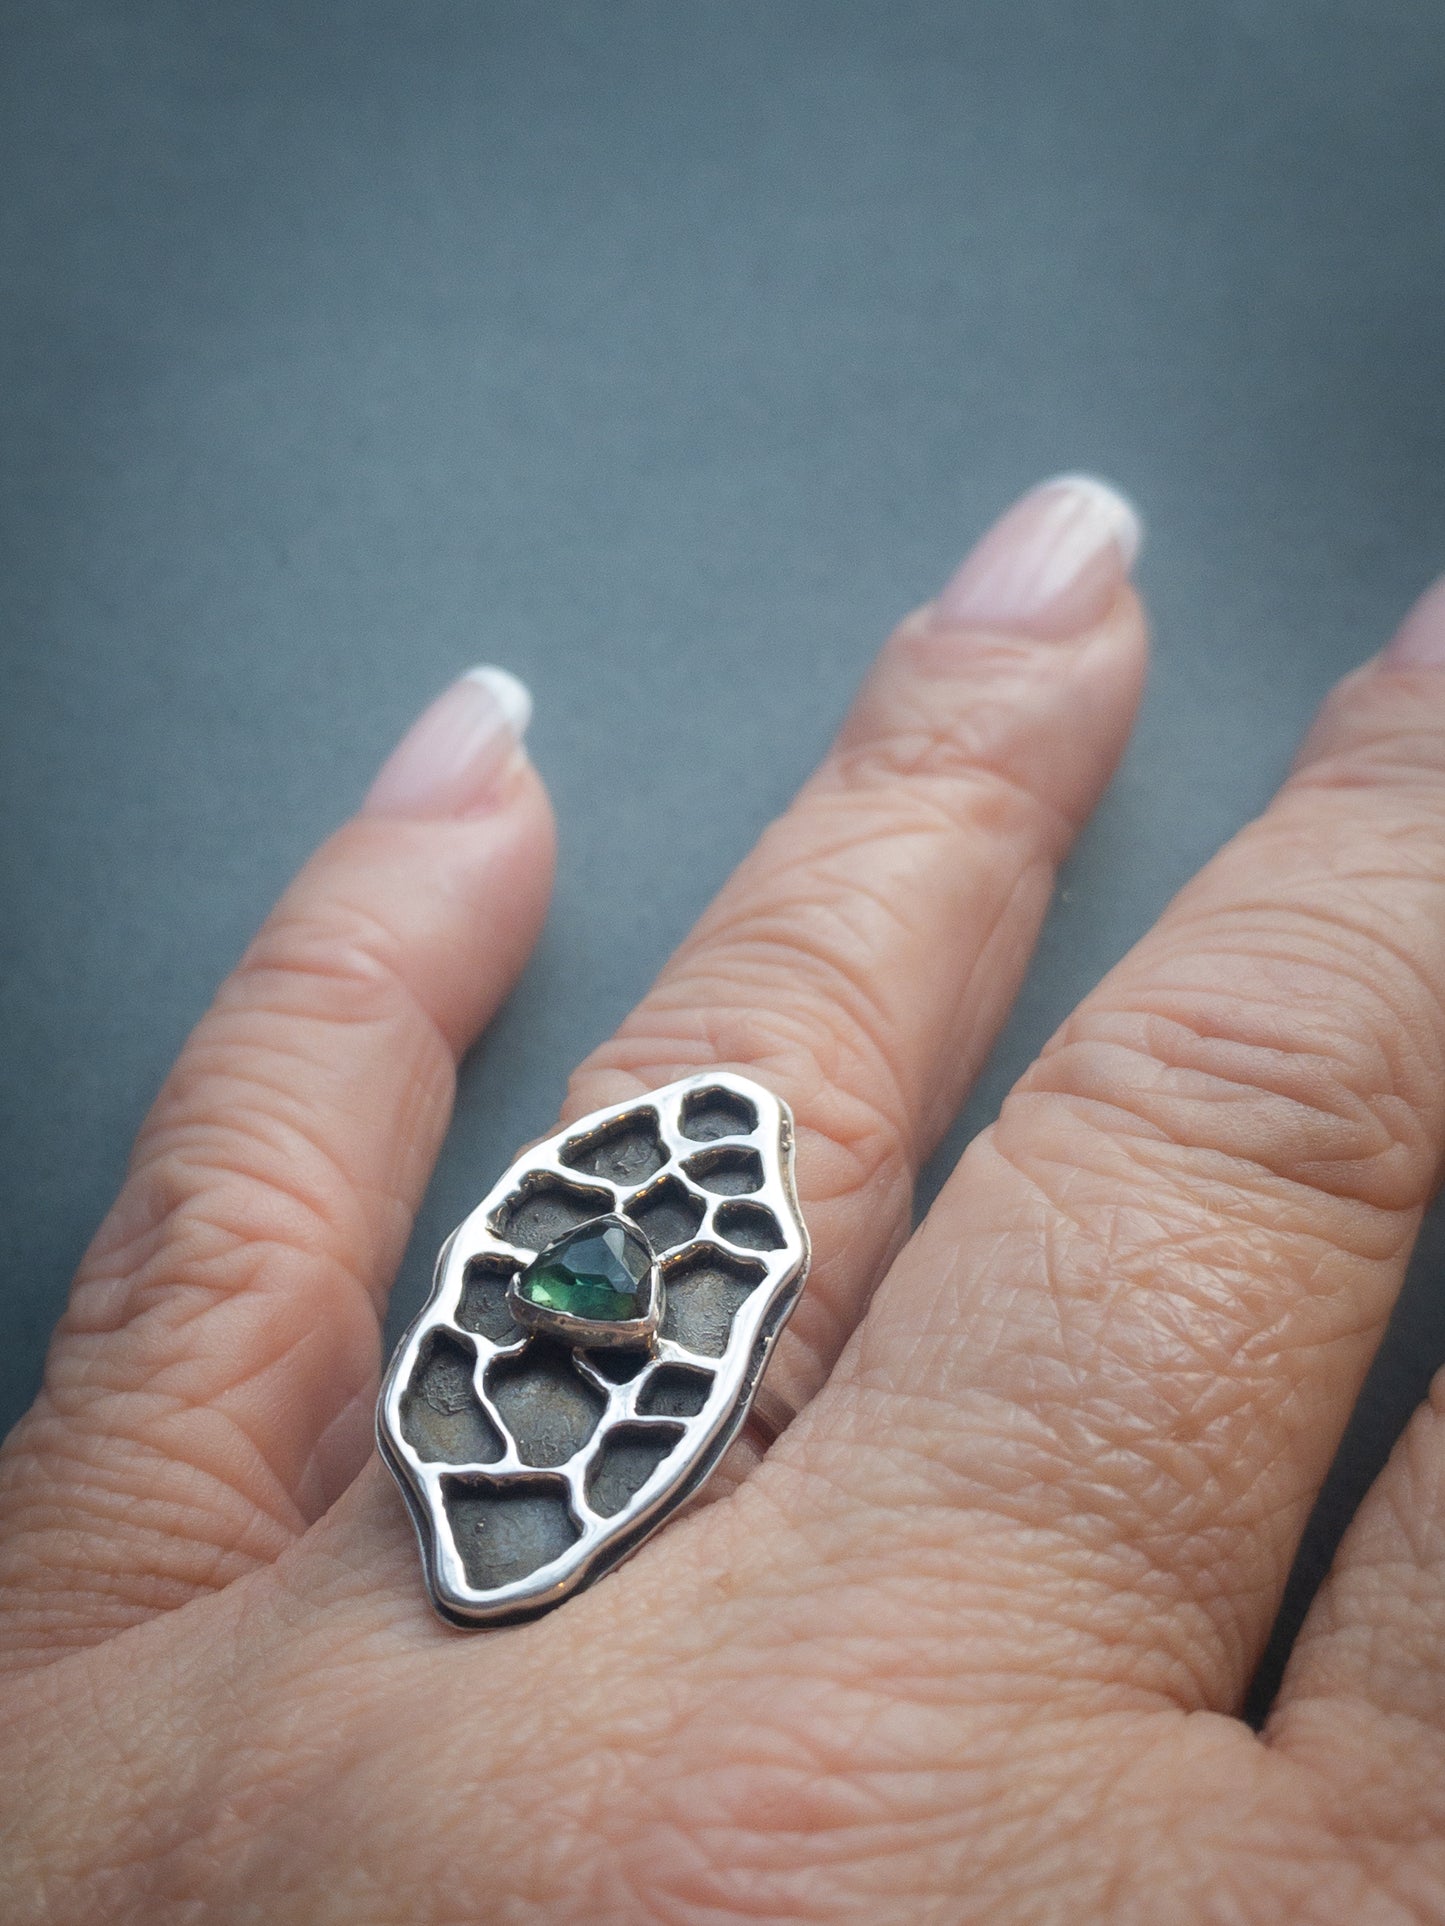 Petoskey Stone Patterned Ring in Sterling Silver and Green Tourmaline